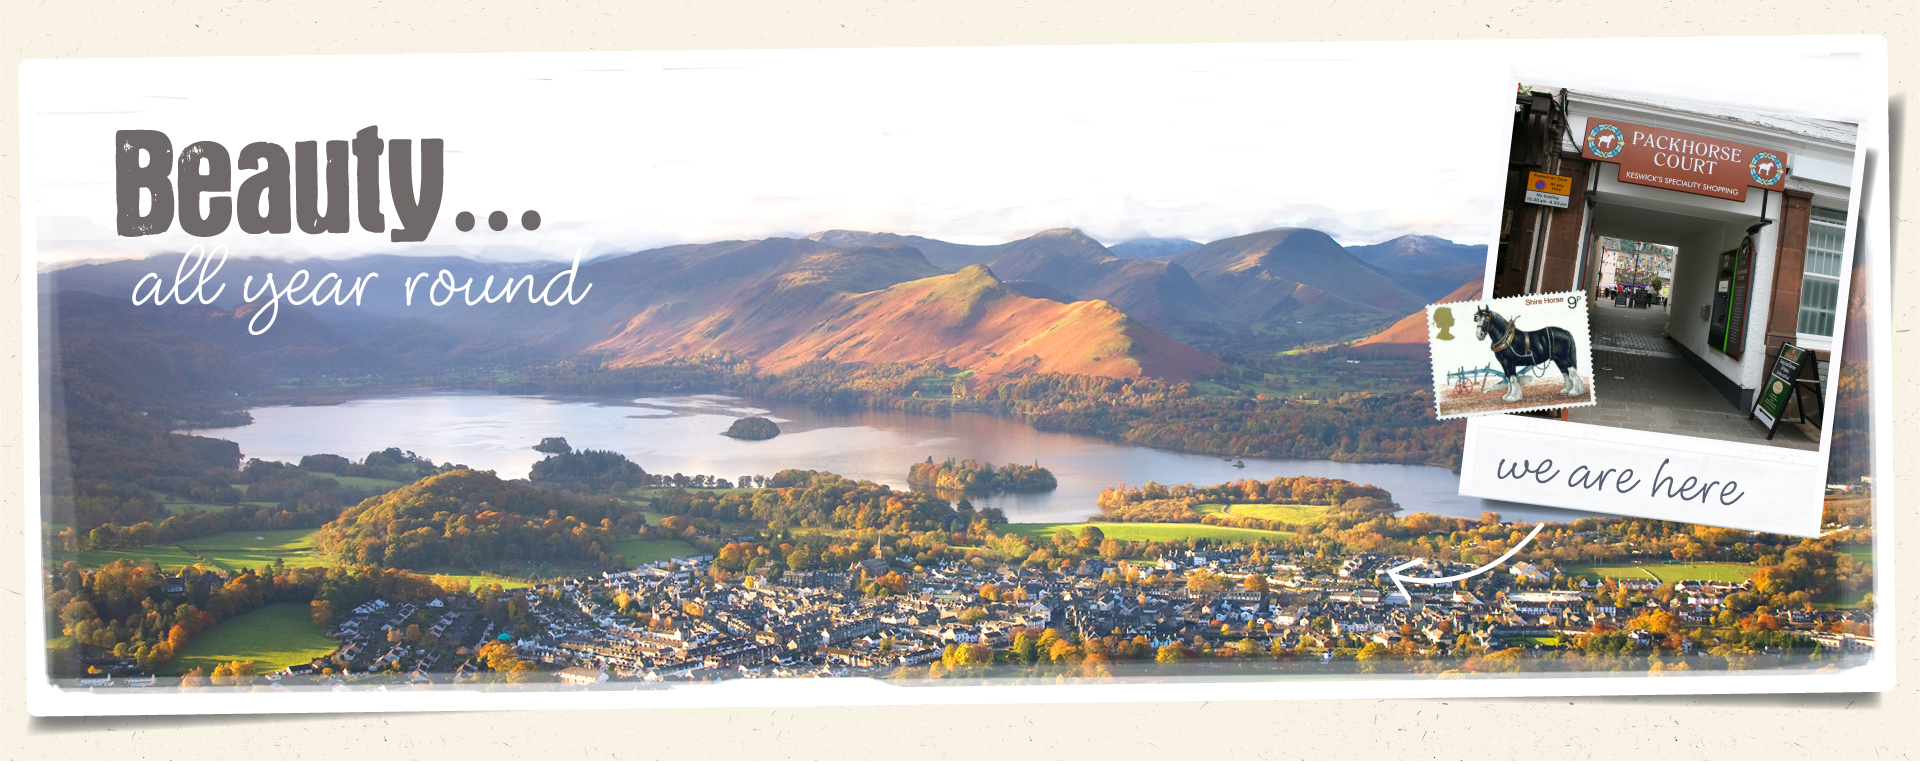 Our shopping destination is located in beautiful Keswick